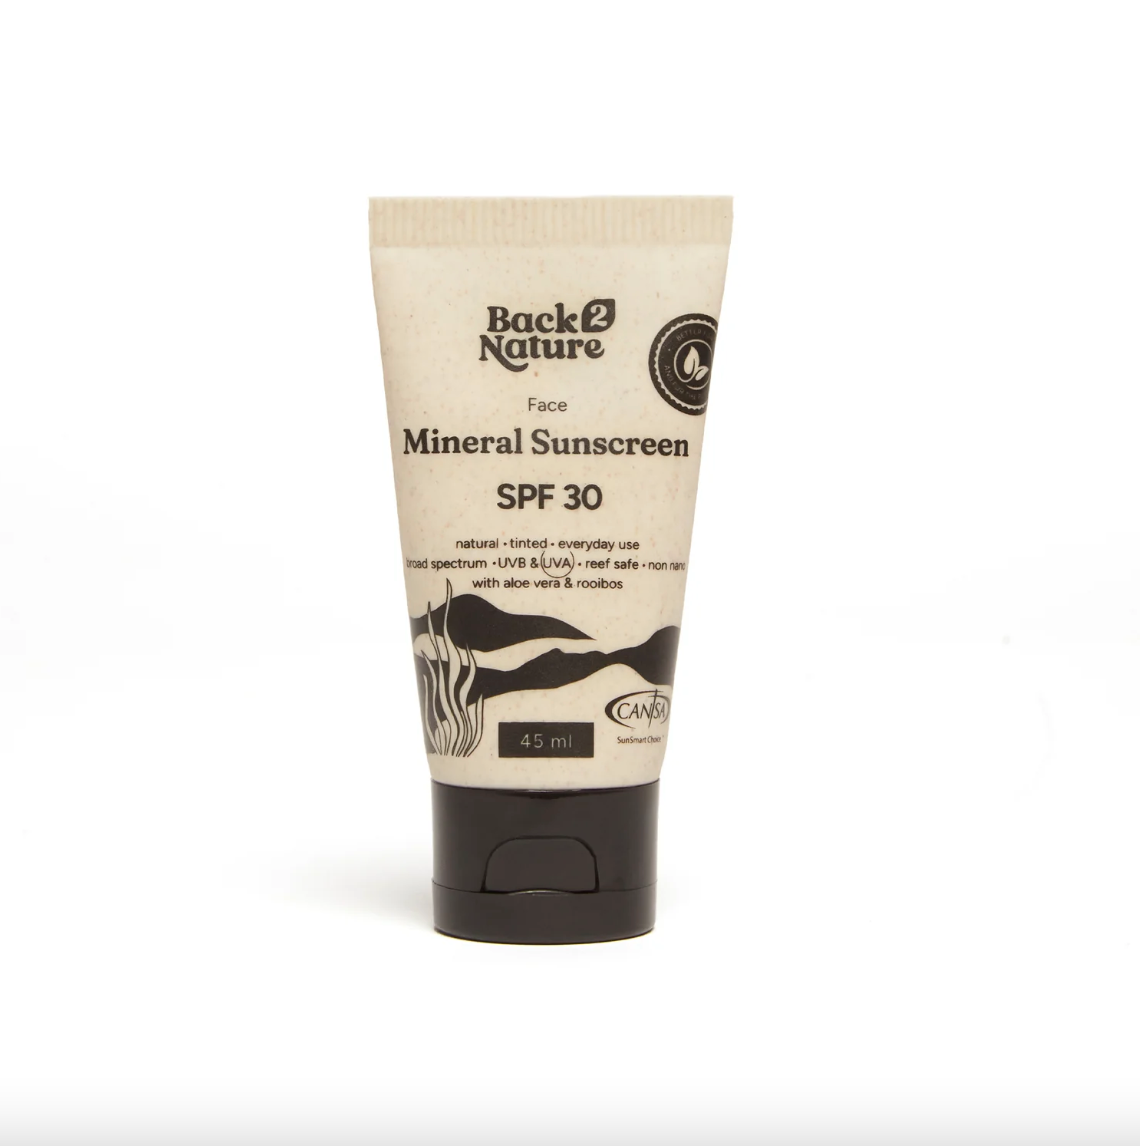 Back2Nature Face Mineral Sunscreen